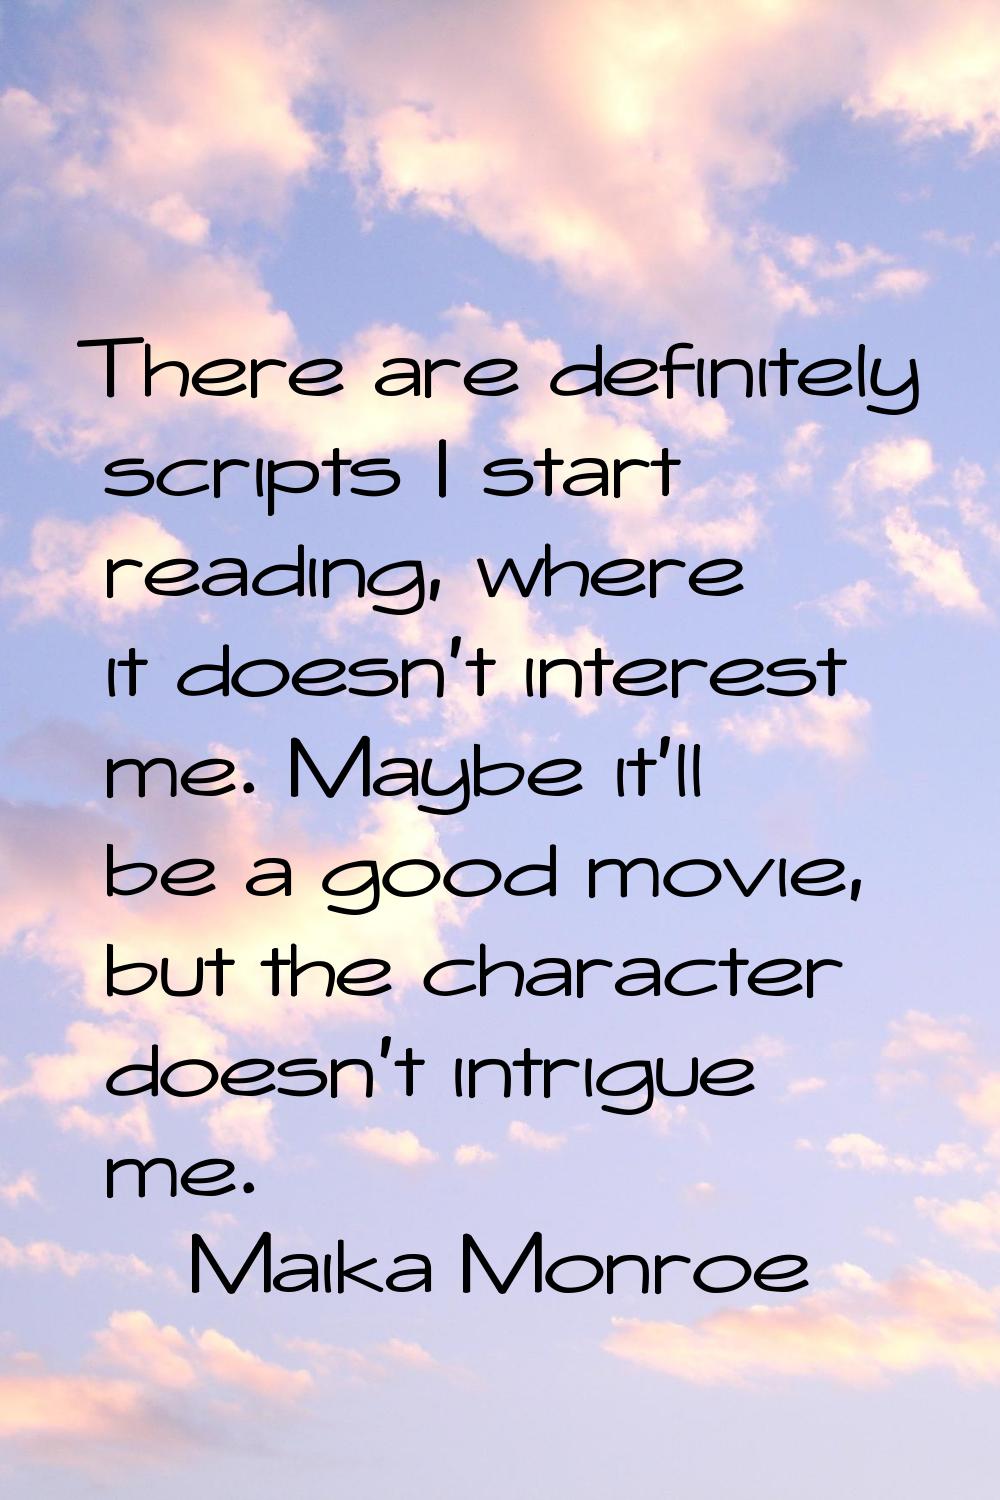 There are definitely scripts I start reading, where it doesn't interest me. Maybe it'll be a good m